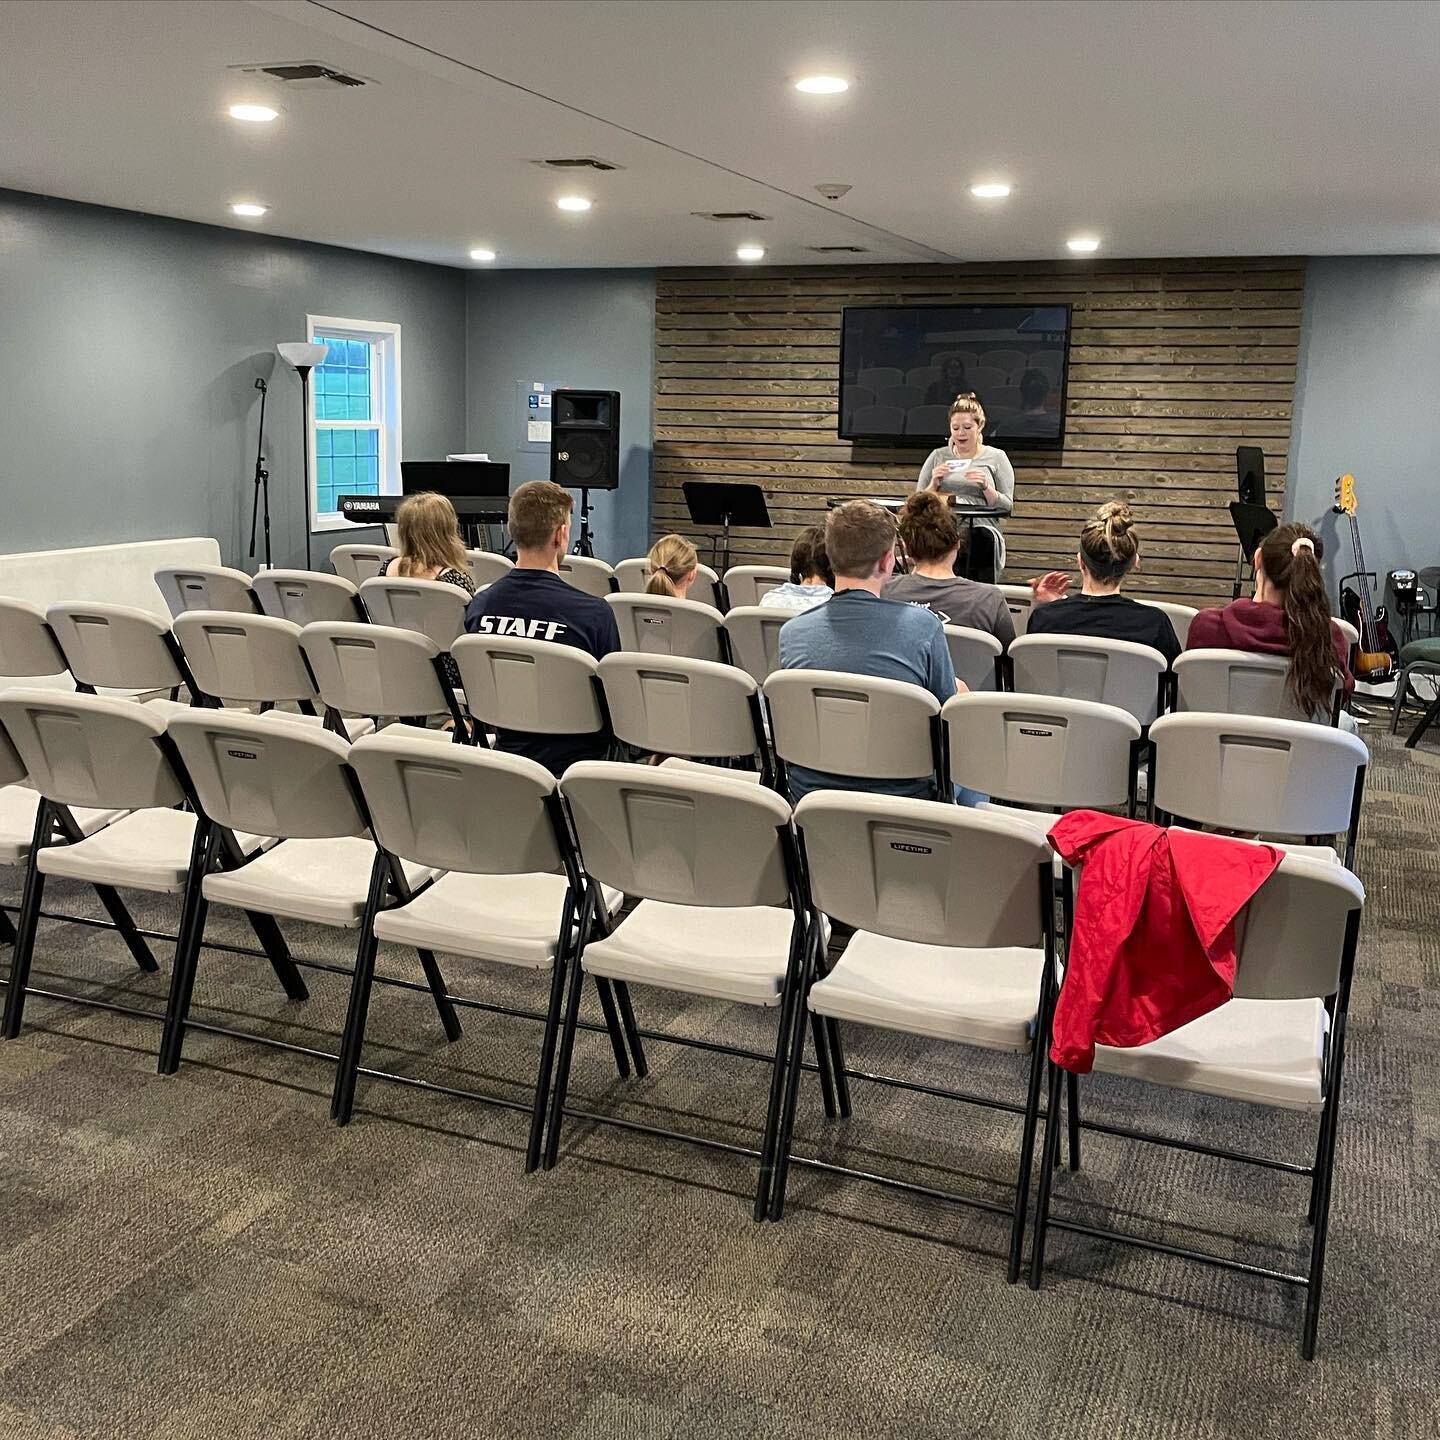 Yesterday, we had the blessing of having Hannah come and teach at Homeschool Next Gen, as she walked students through Romans 15 and its implications.

There are now two weeks left of Next Gen!!